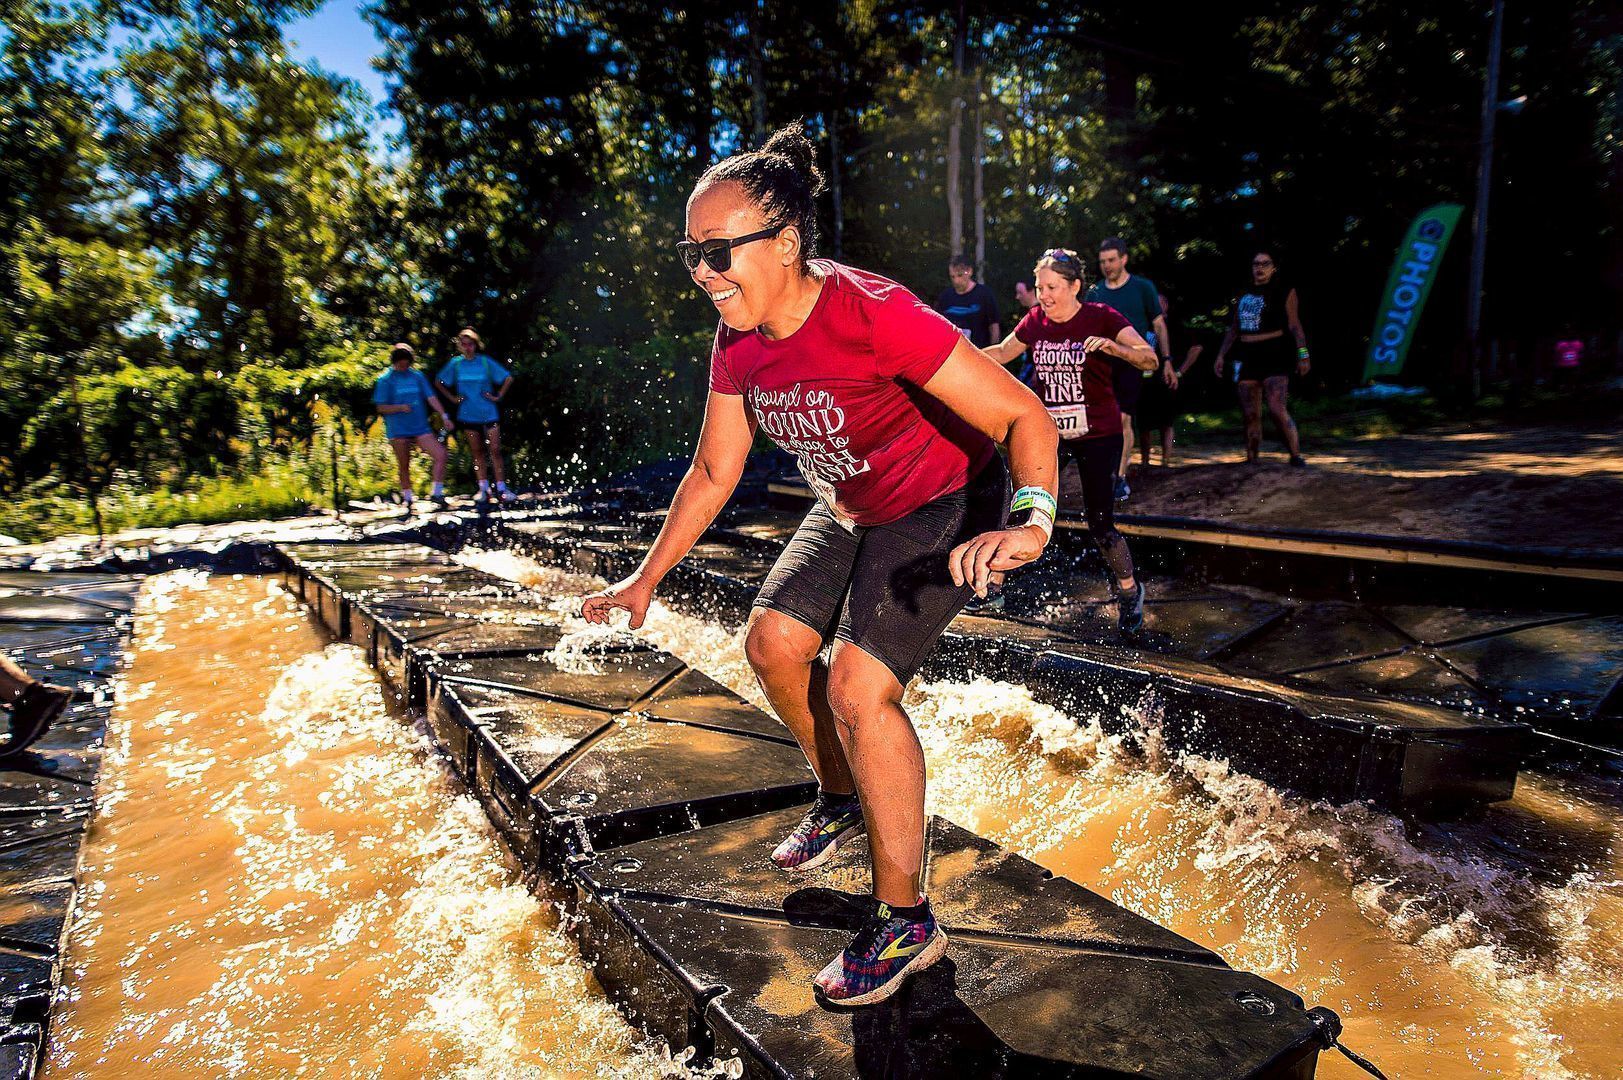 Rugged Maniac 5K Obstacle Course - Southern Indiana, French Lick, Indiana, United States